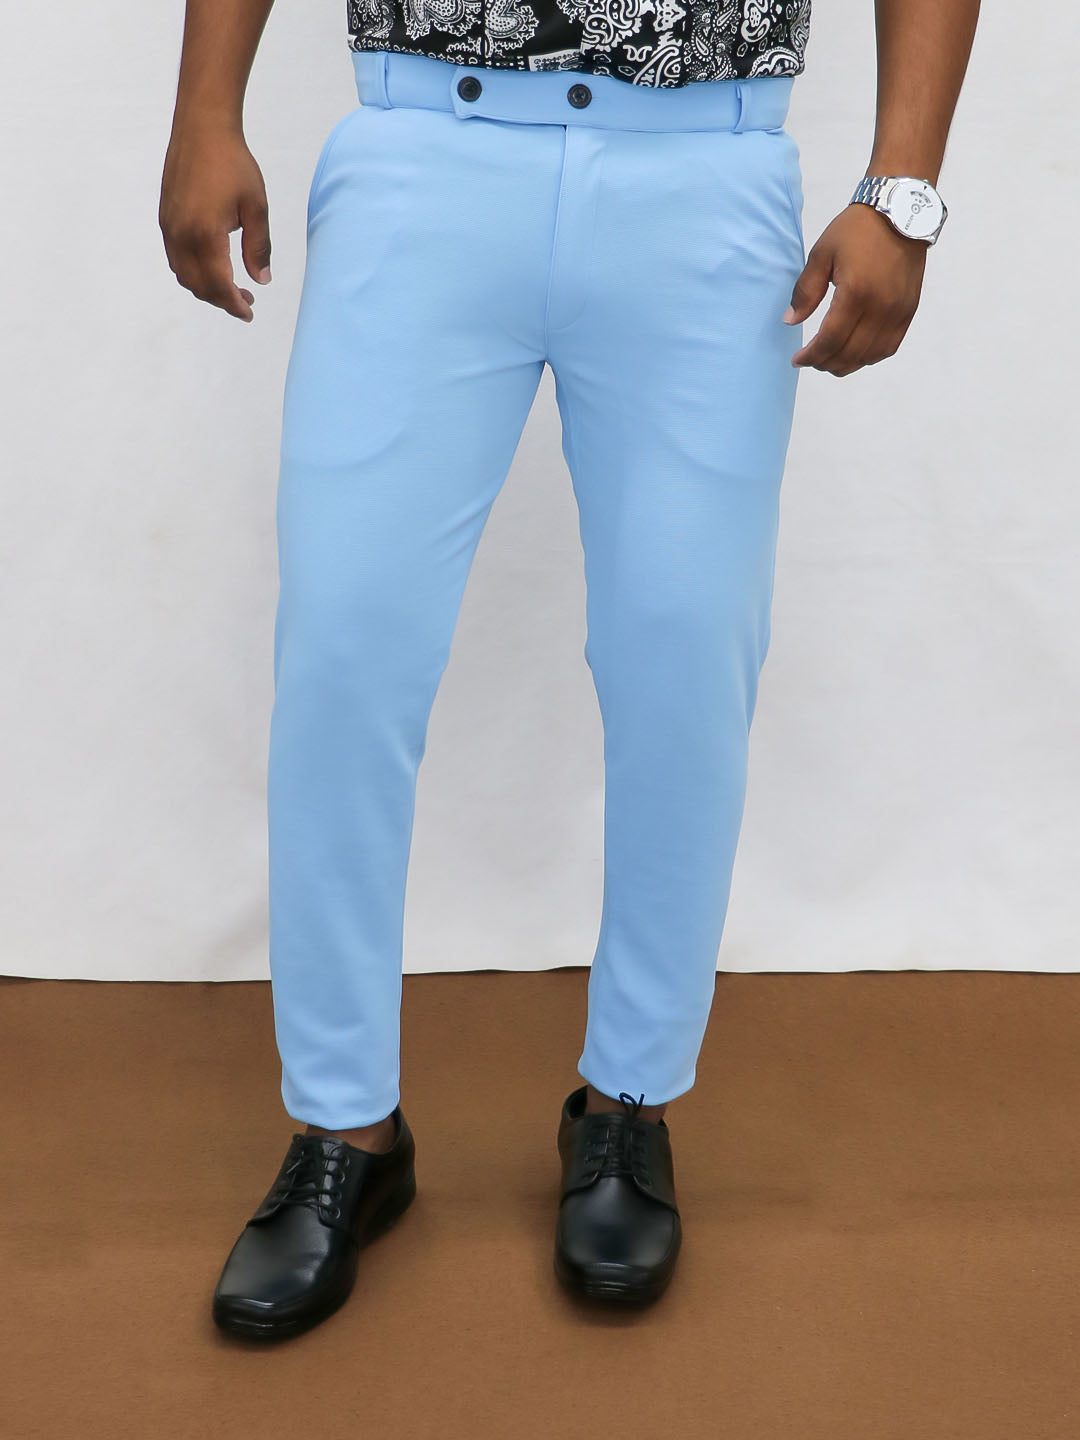 4 way Stretchable Cotton Lycra pant... - Brother's Mens wear | Facebook